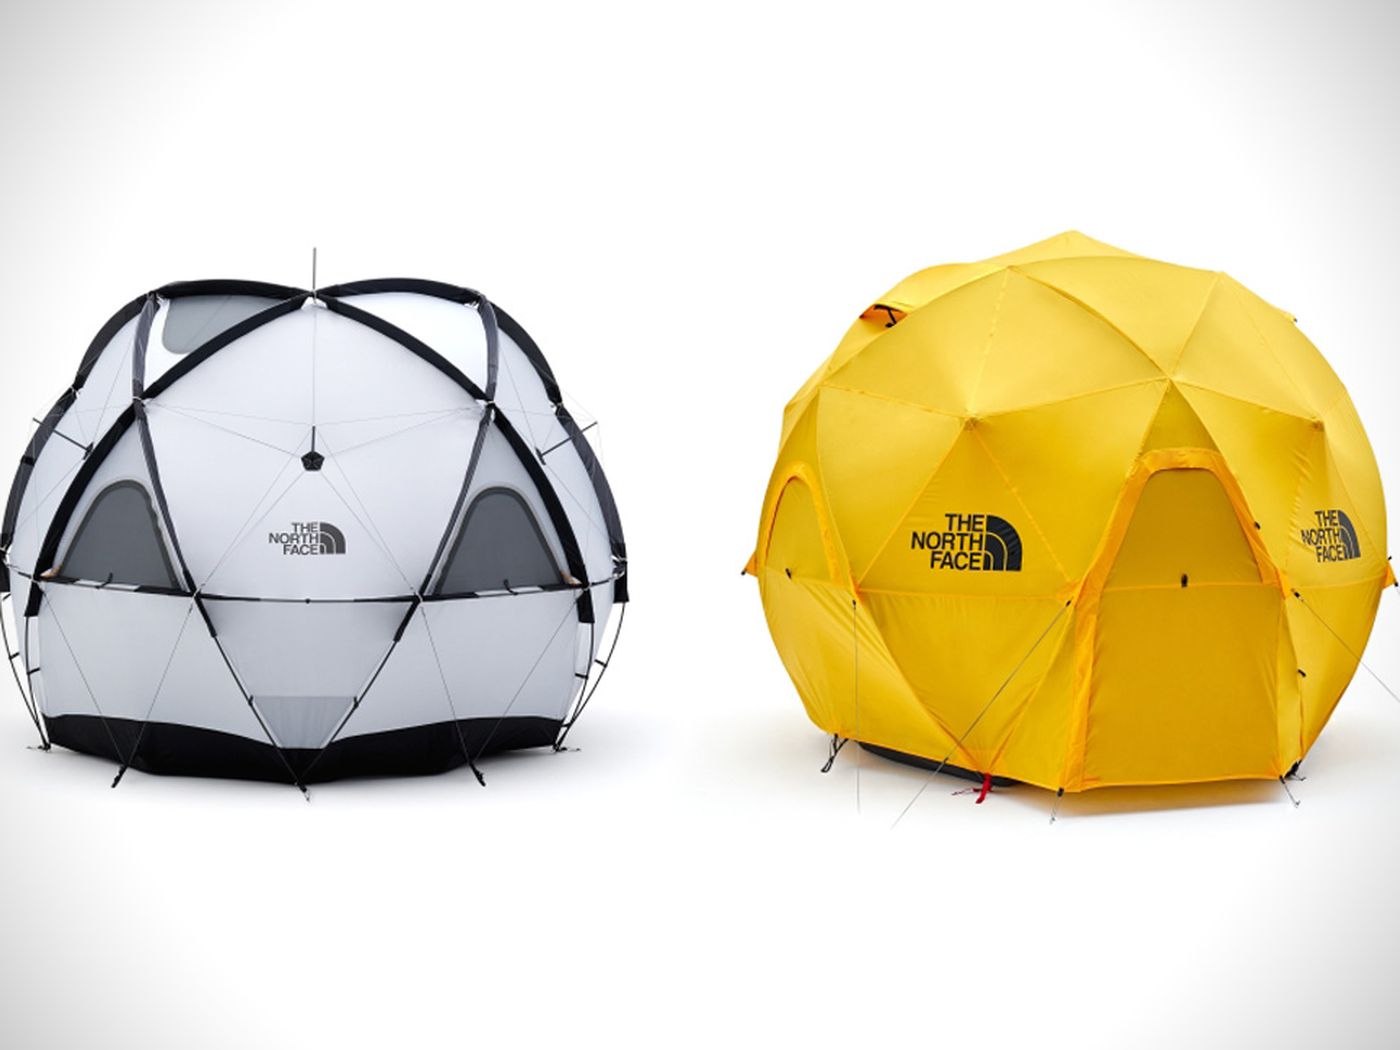 North Face introduces a groovy geodesic dome tent - Curbed